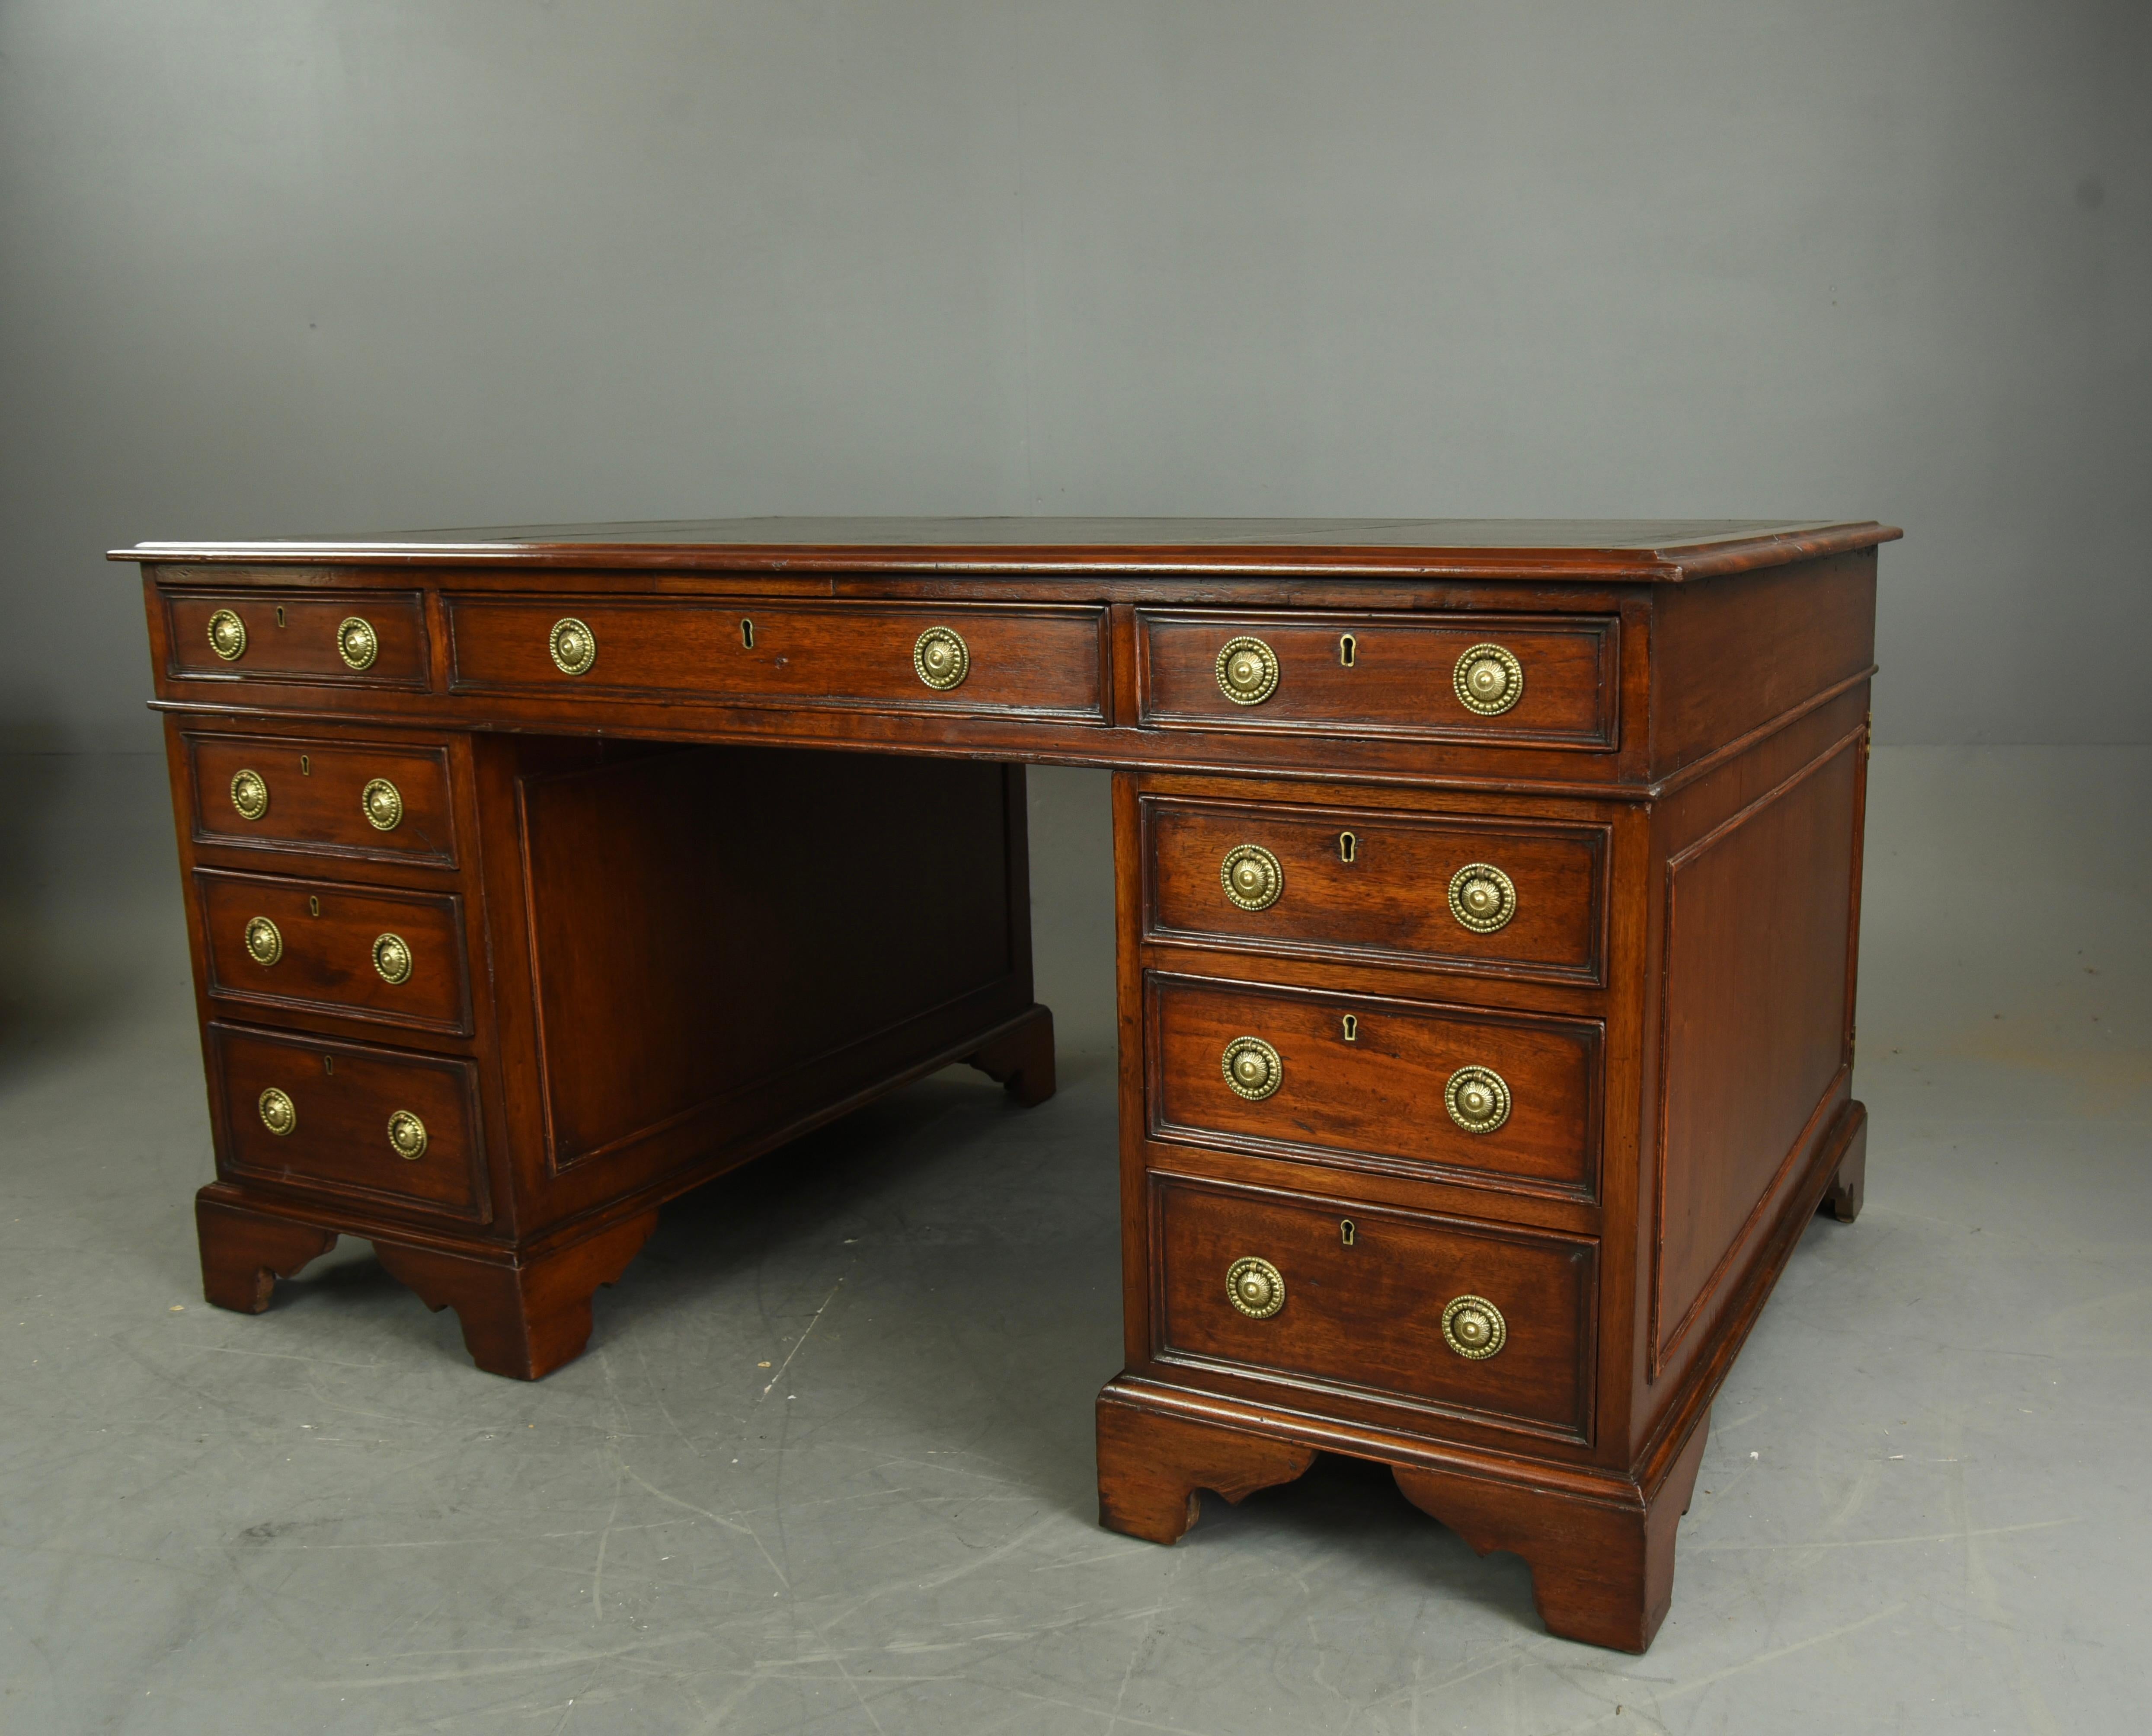 Fine Quality late Victorian partners desk in the Georgian style circa 1880 .
The desk has 9 drawers to one side with two cupboards and 3 drawers to the apposing side .
It is a great practical size with a large working surface 152 cm x 98 cm with a